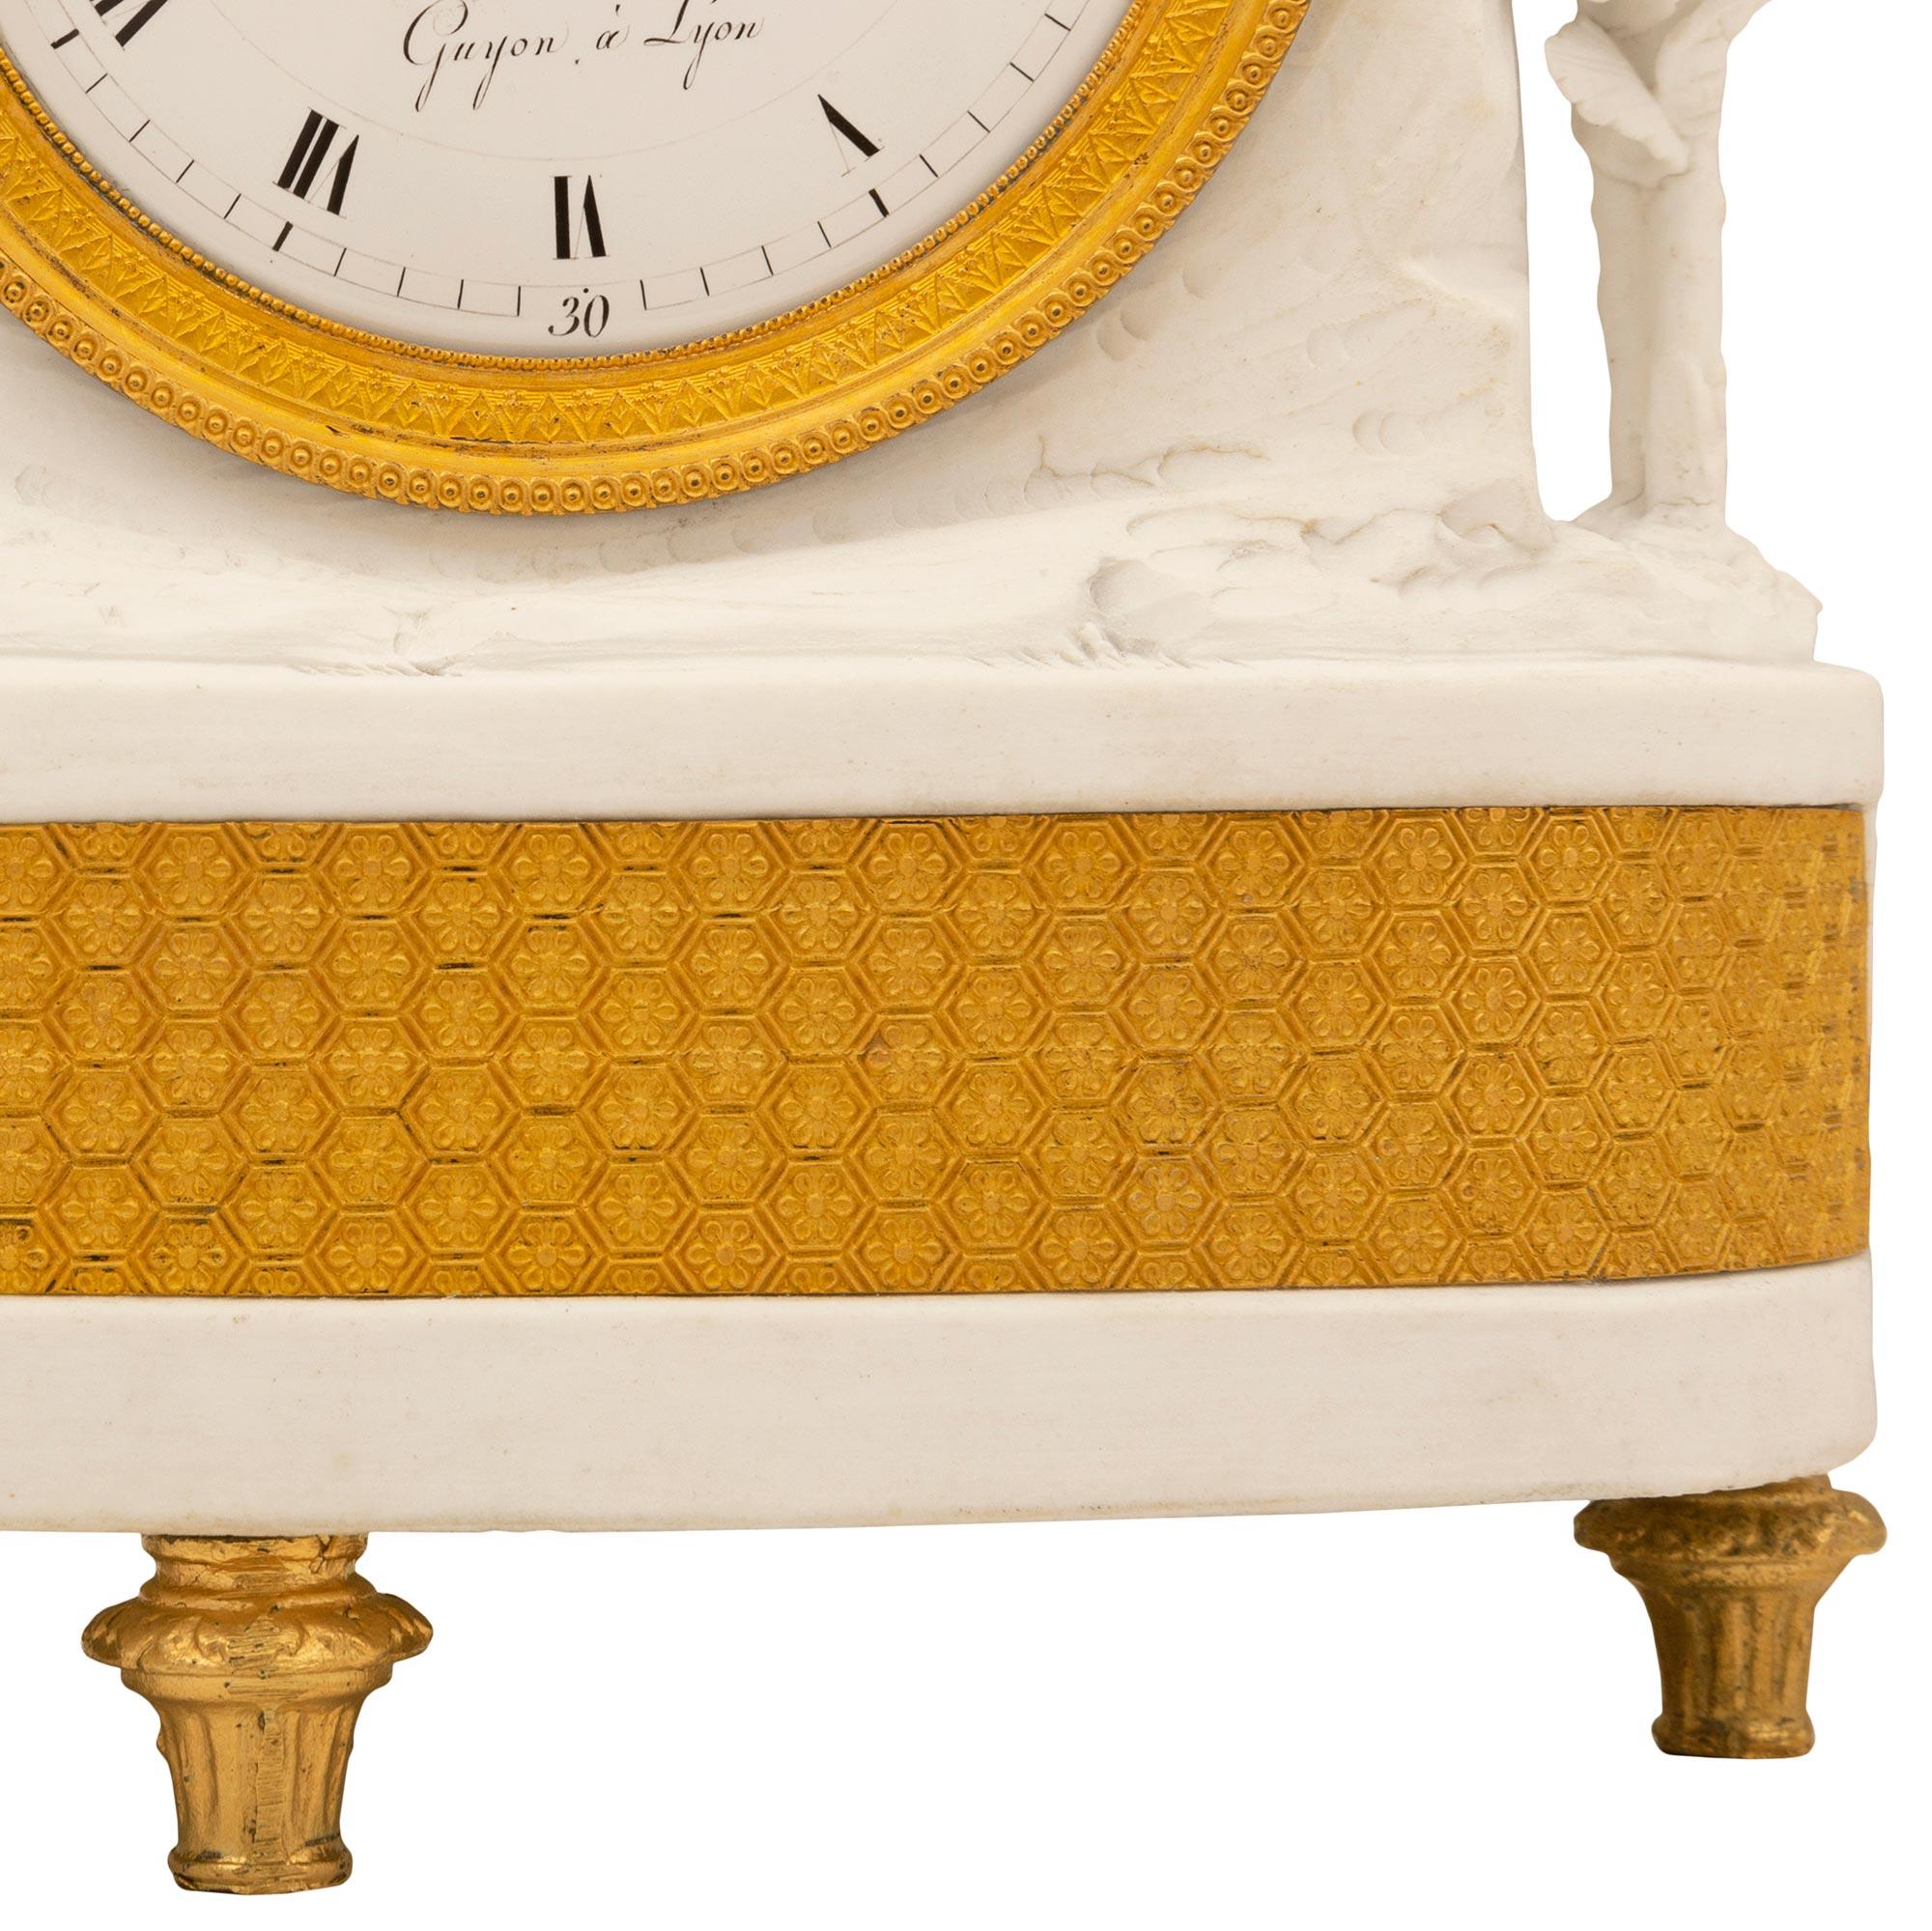 French Neoclassical Style Sevres Bisque Clock Signed Guyon a Lyon For Sale 3